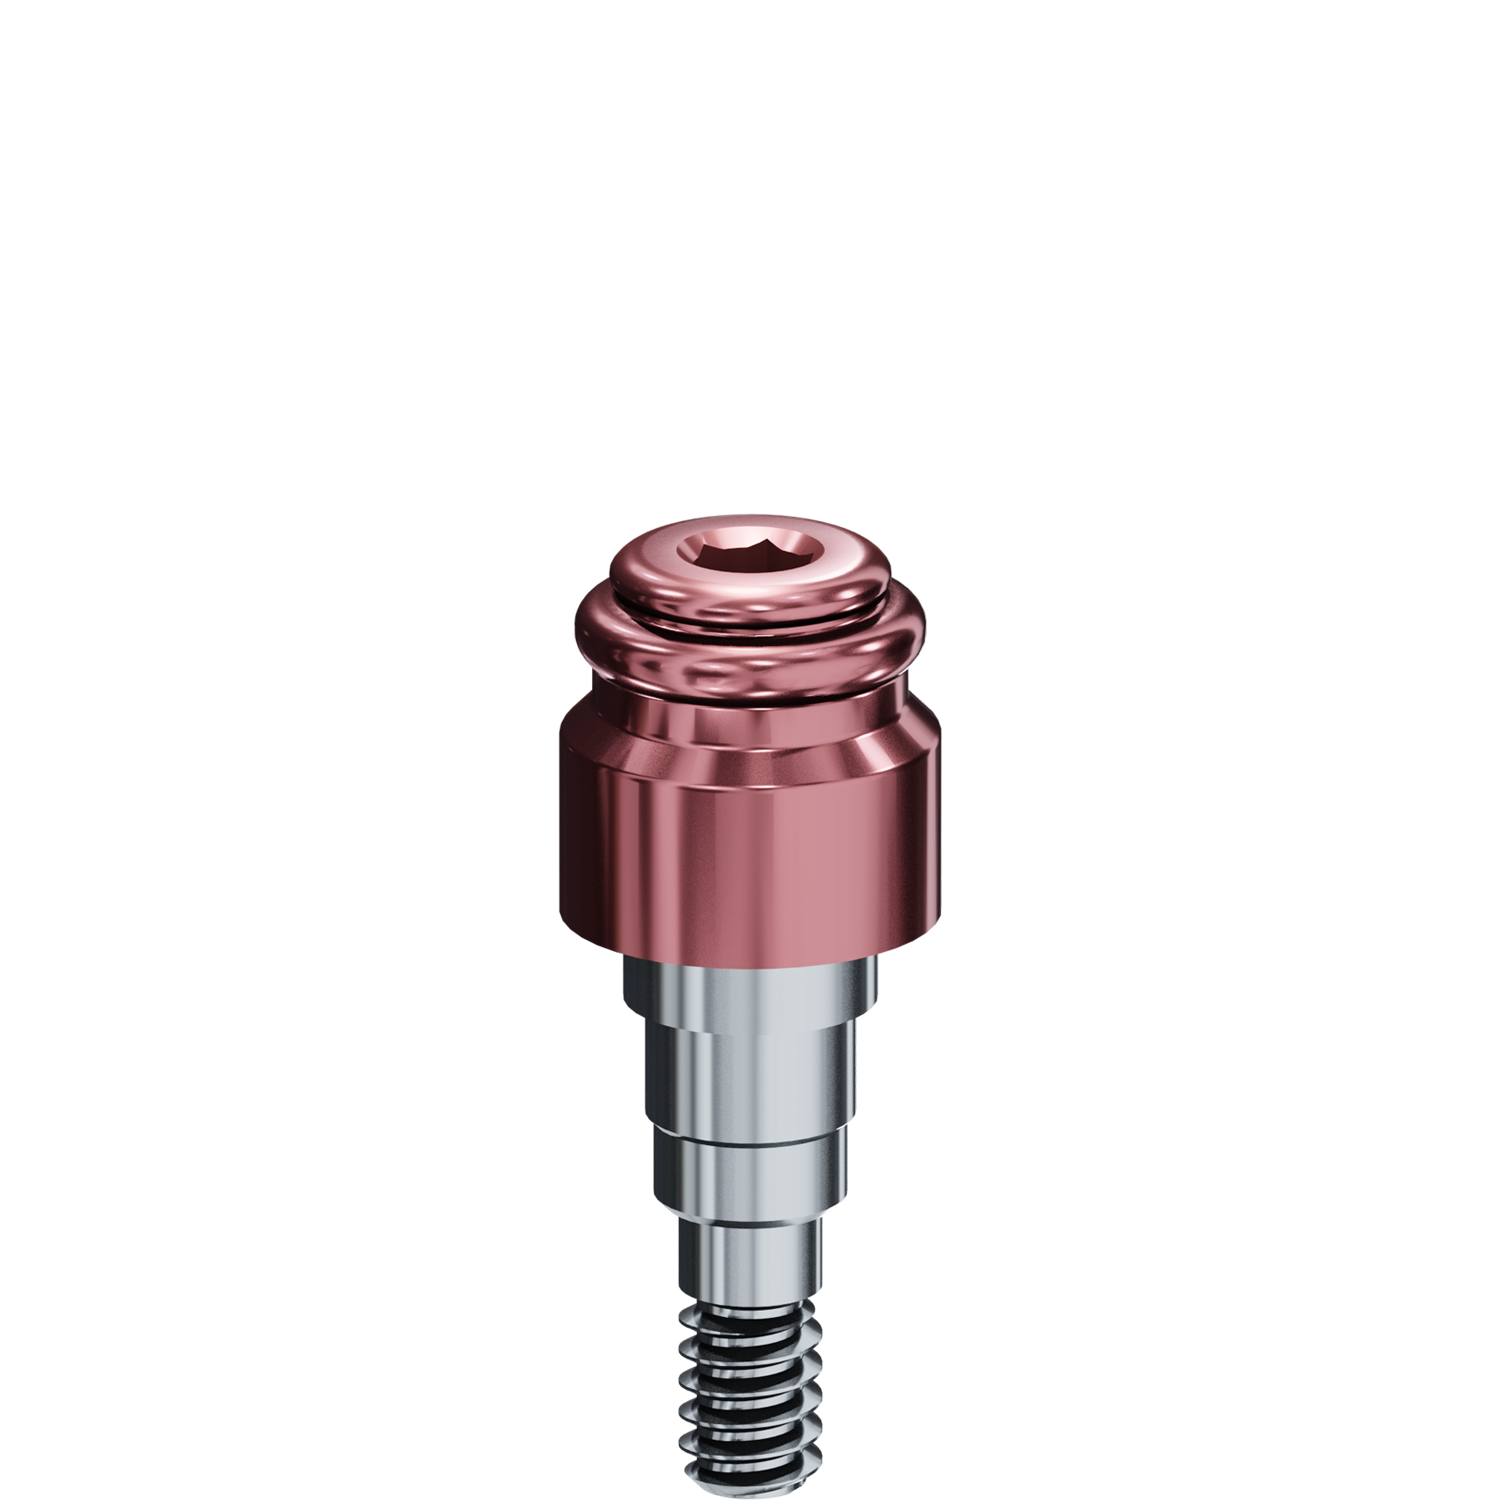 R-Tx Attachment System - Biomet 3i® - 4.1mm Certain Connection - 0.048" Drive - 4.0mm